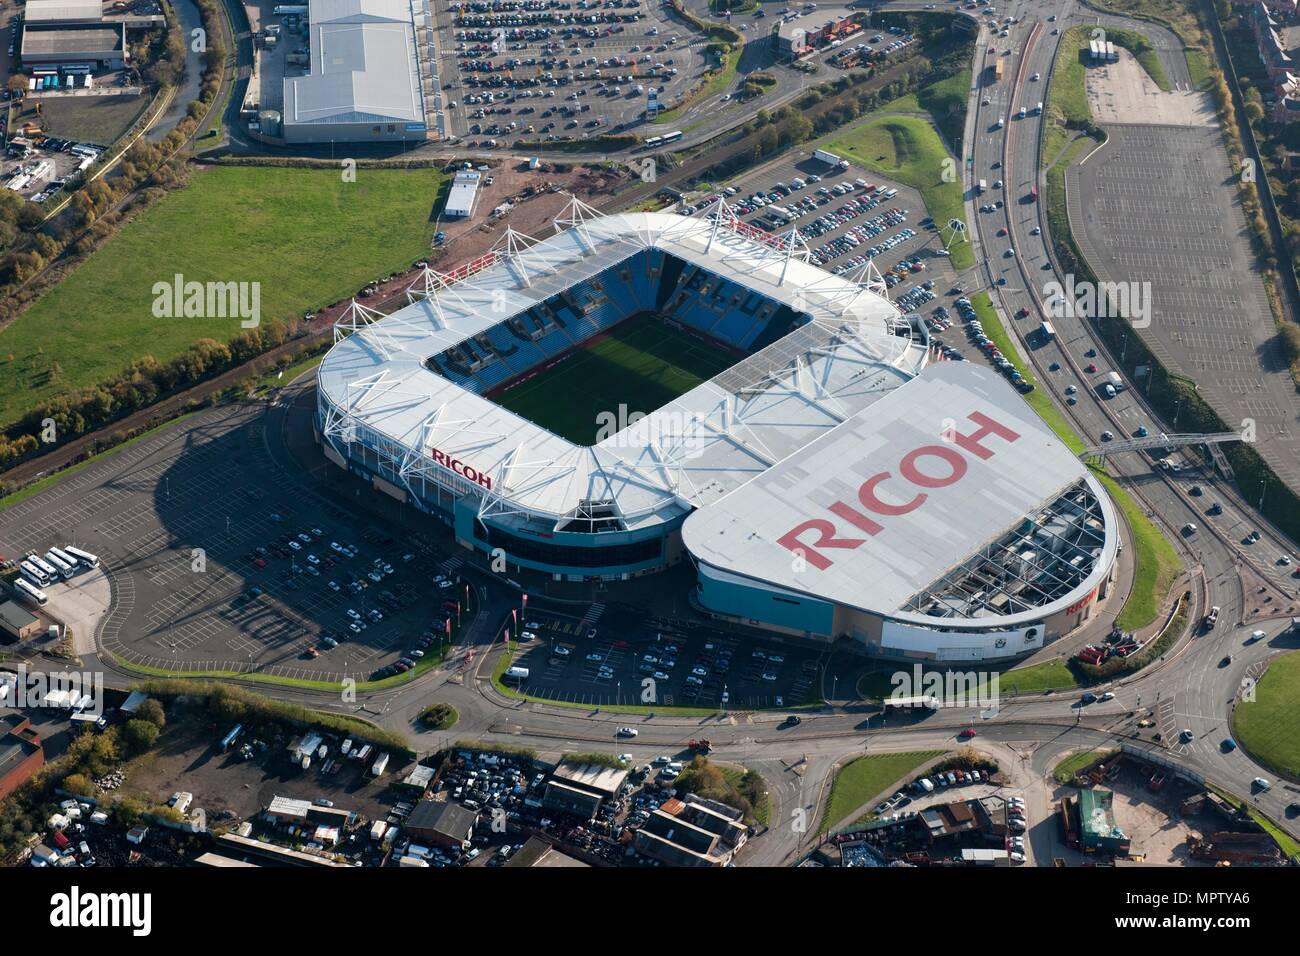 The Ricoh Arena, Coventry, West Midlands, 2014, Artist: Damian Grady. Stock Photo